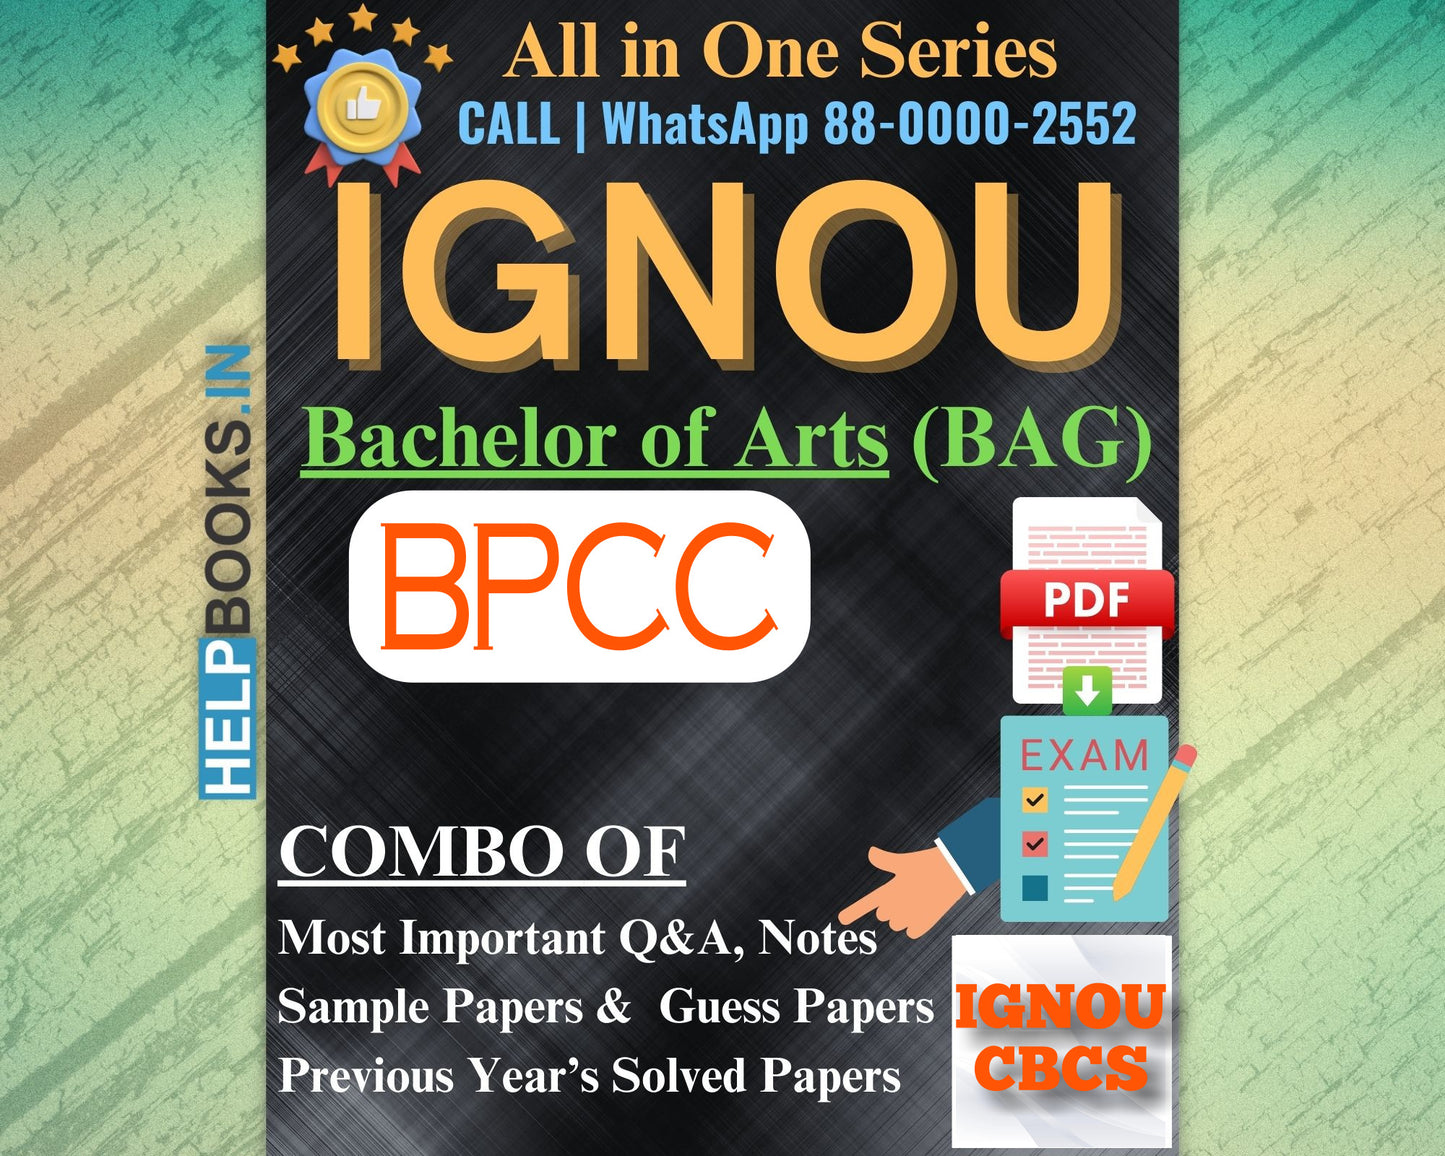 IGNOU BAG Online Study Package: Bachelor of Arts (BA) - Previous Year’s Solved Papers, Q&A, Exam Notes, Sample Papers, Guess Papers-BPCC131, BPCC132, BPCC133, BPCC134